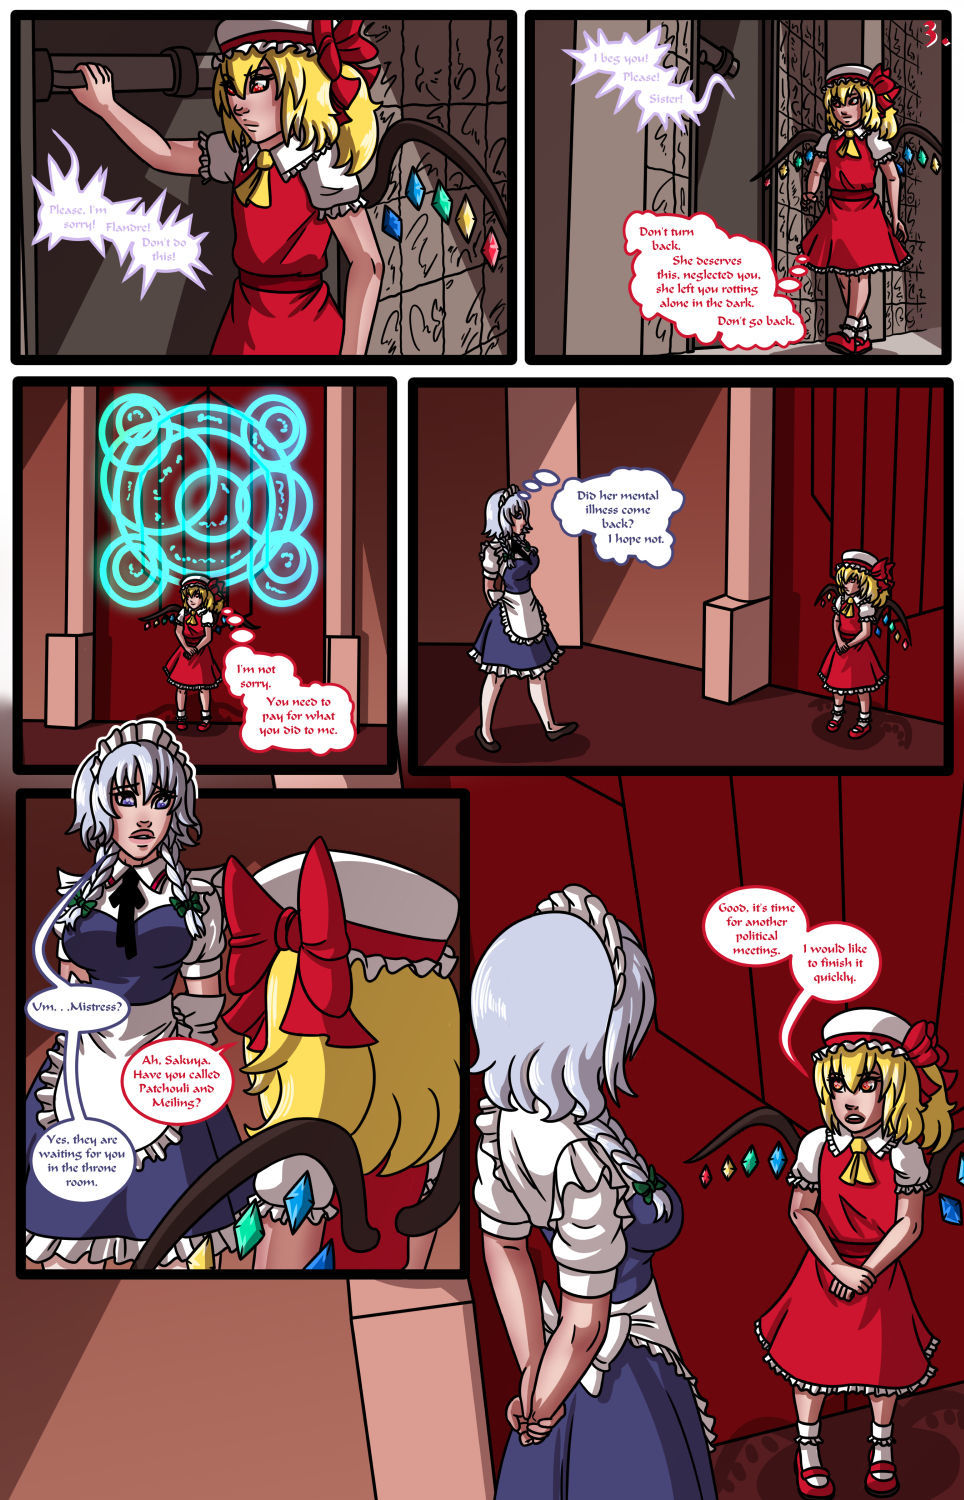 Overthrone - JZerosk page 3